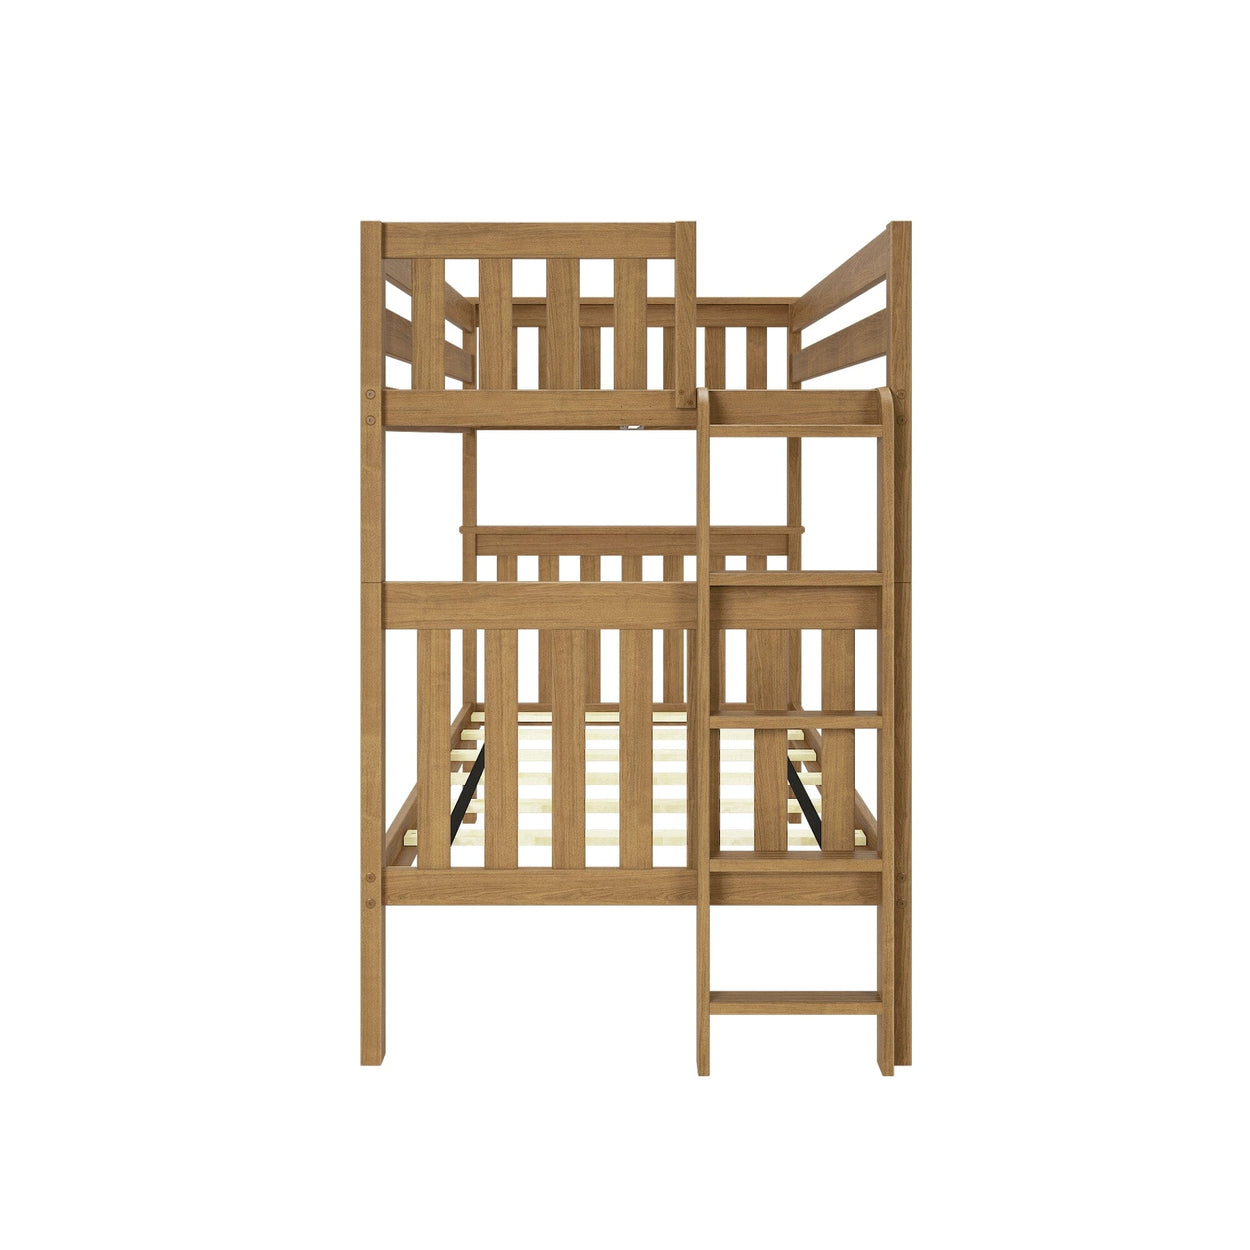 185305-007 : Bunk Beds Twin over Twin Bunk Bed with Ladder on End, Pecan